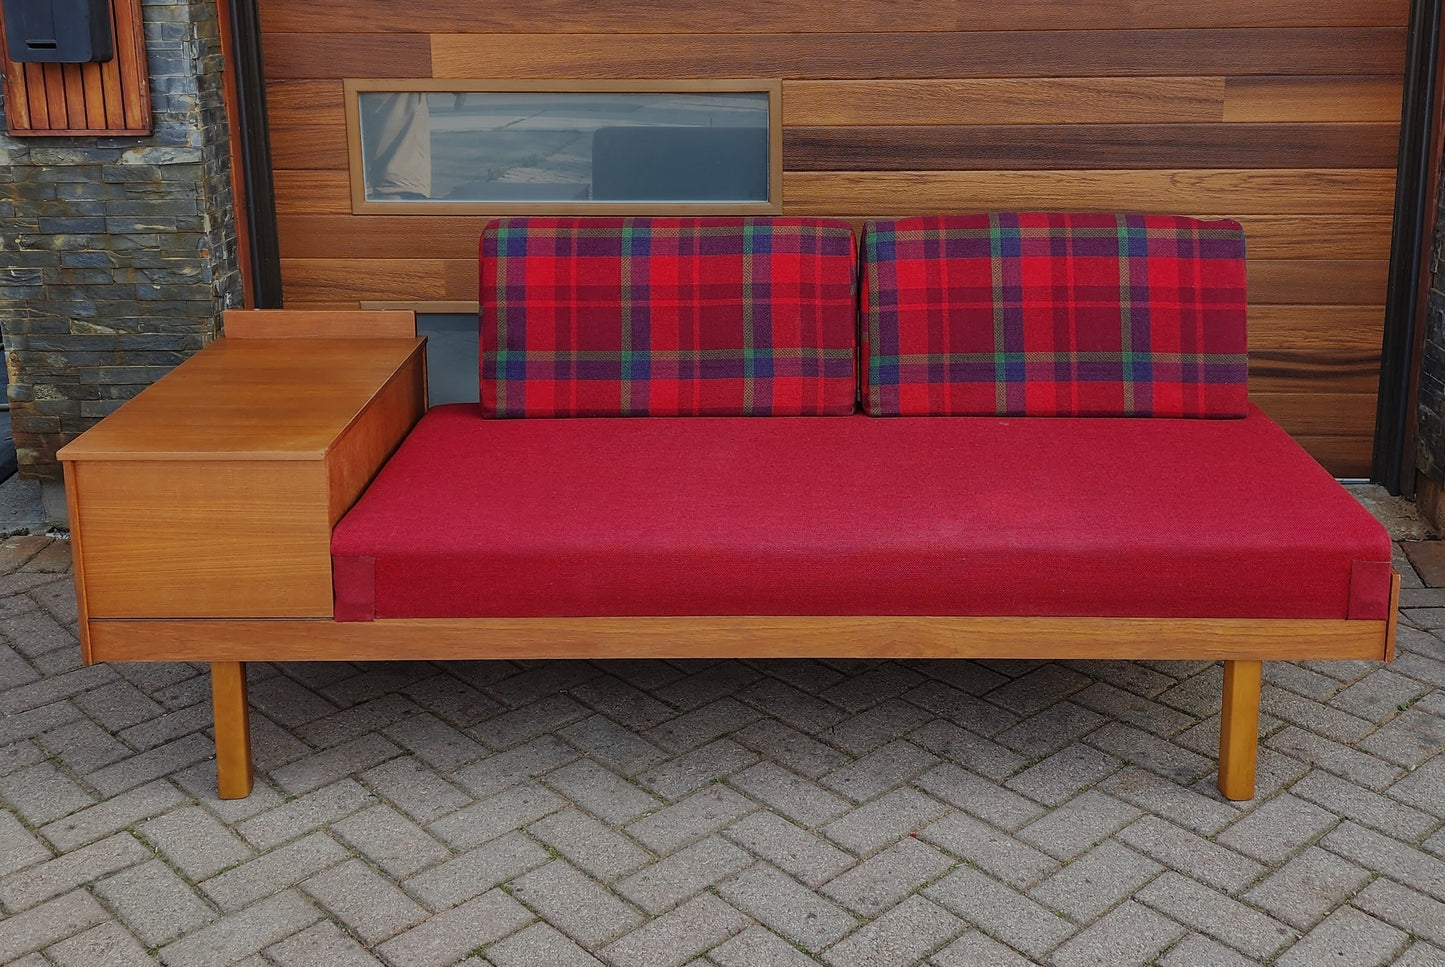 REFINISHED Mid Century Modern Teak Sofa - Bed by Hove Mobler